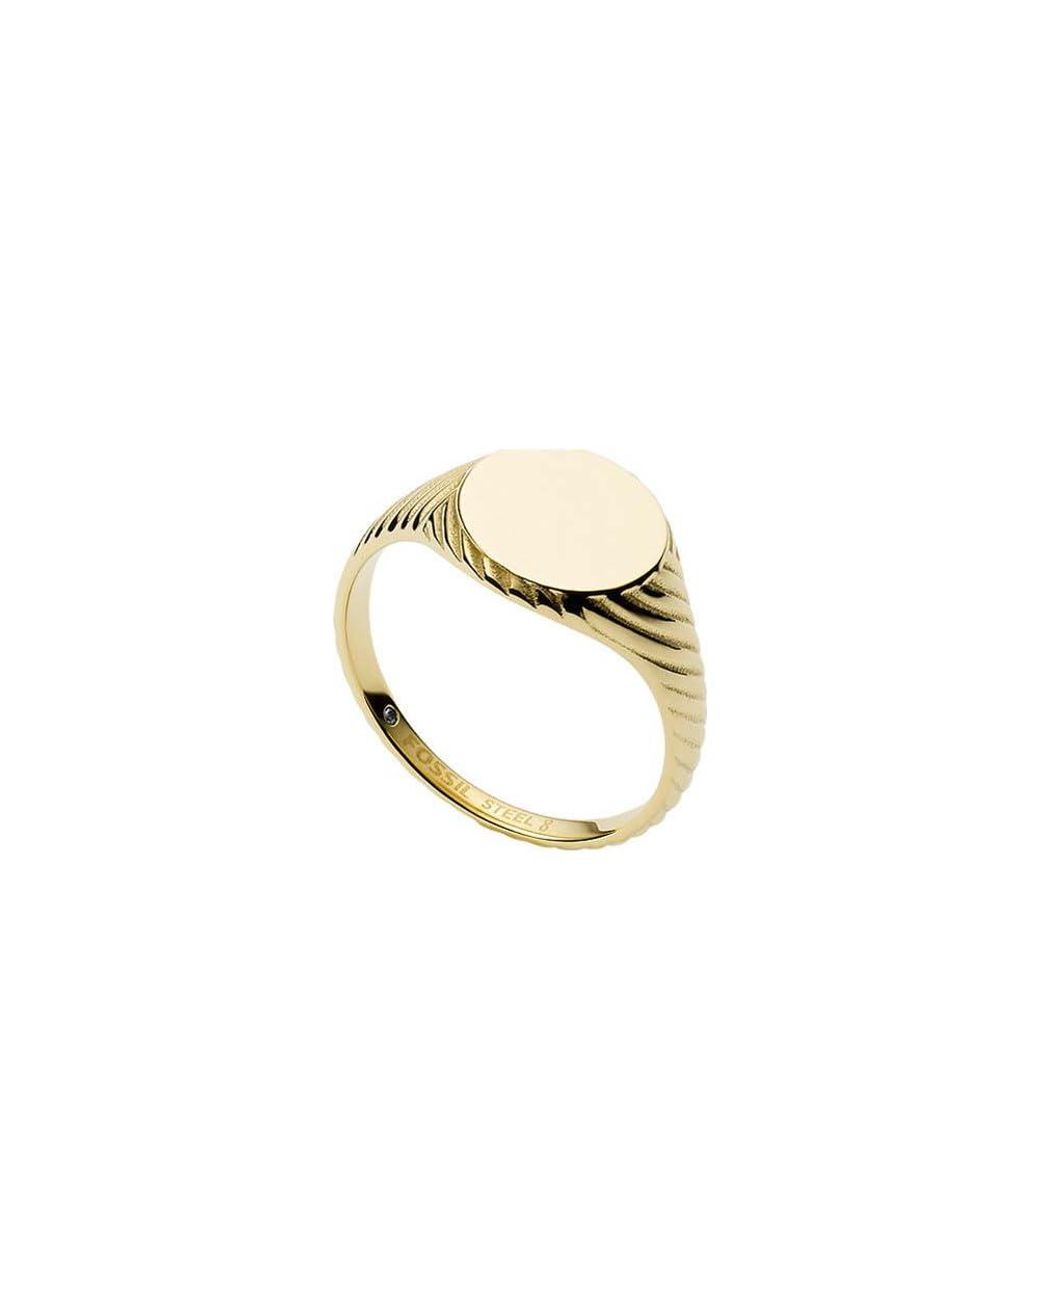 Fossil Sadie Vintage Twists Jf03804710 Signet Ring Stainless Steel  Gold-coloured in Metallic | Lyst UK